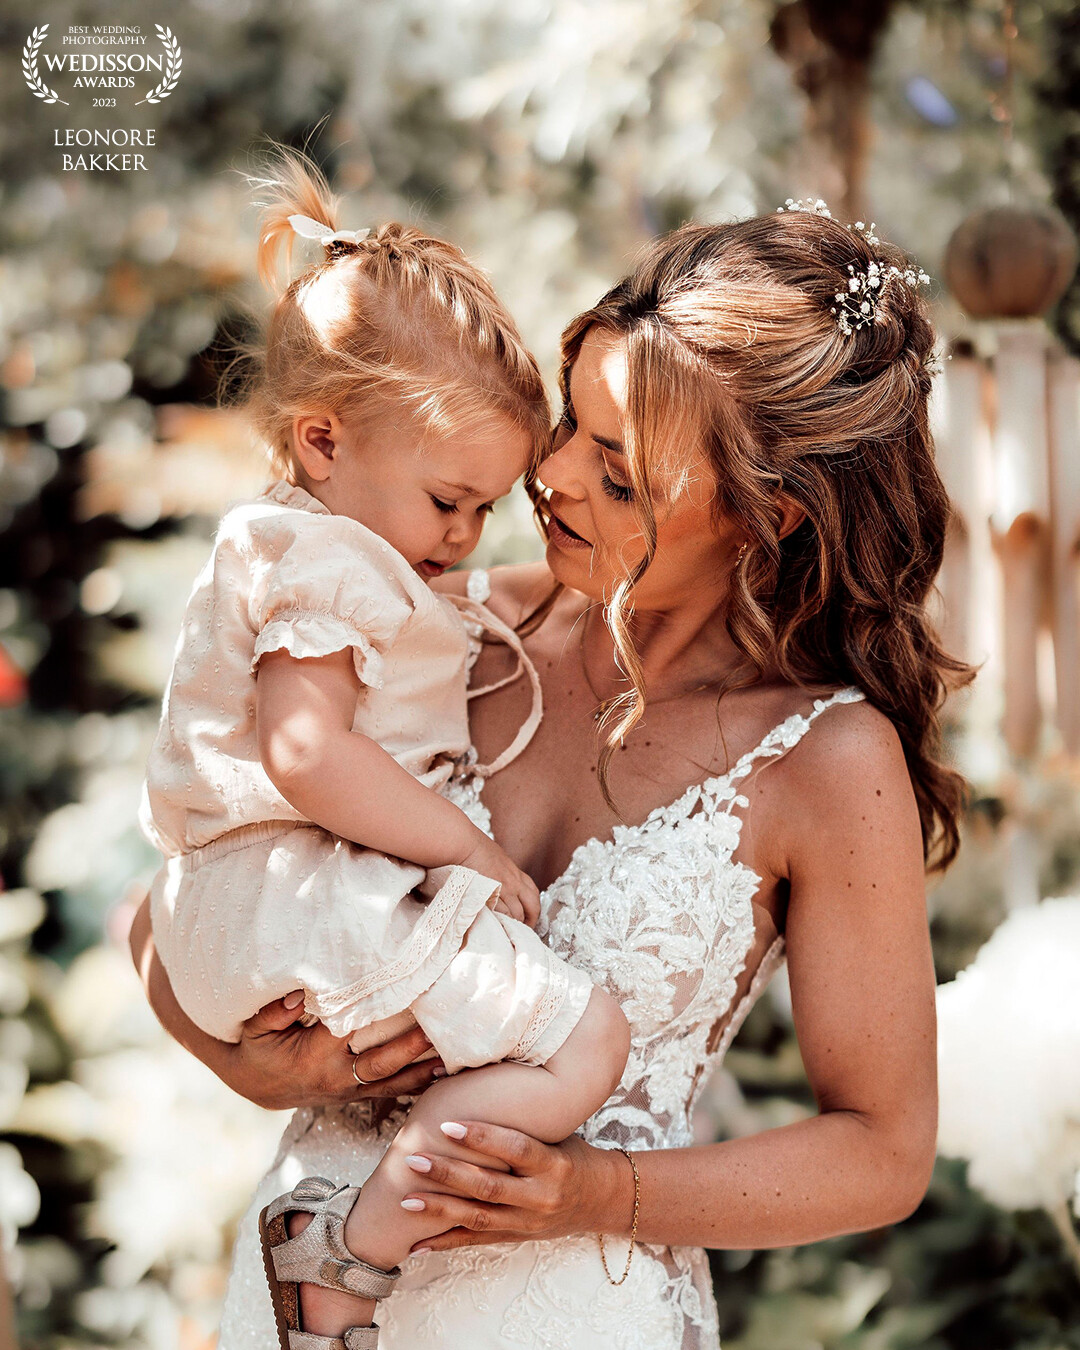 A Mother's Love…  Just moments before exchanging vows, our beautiful bride steals a heartwarming kiss from her little princess